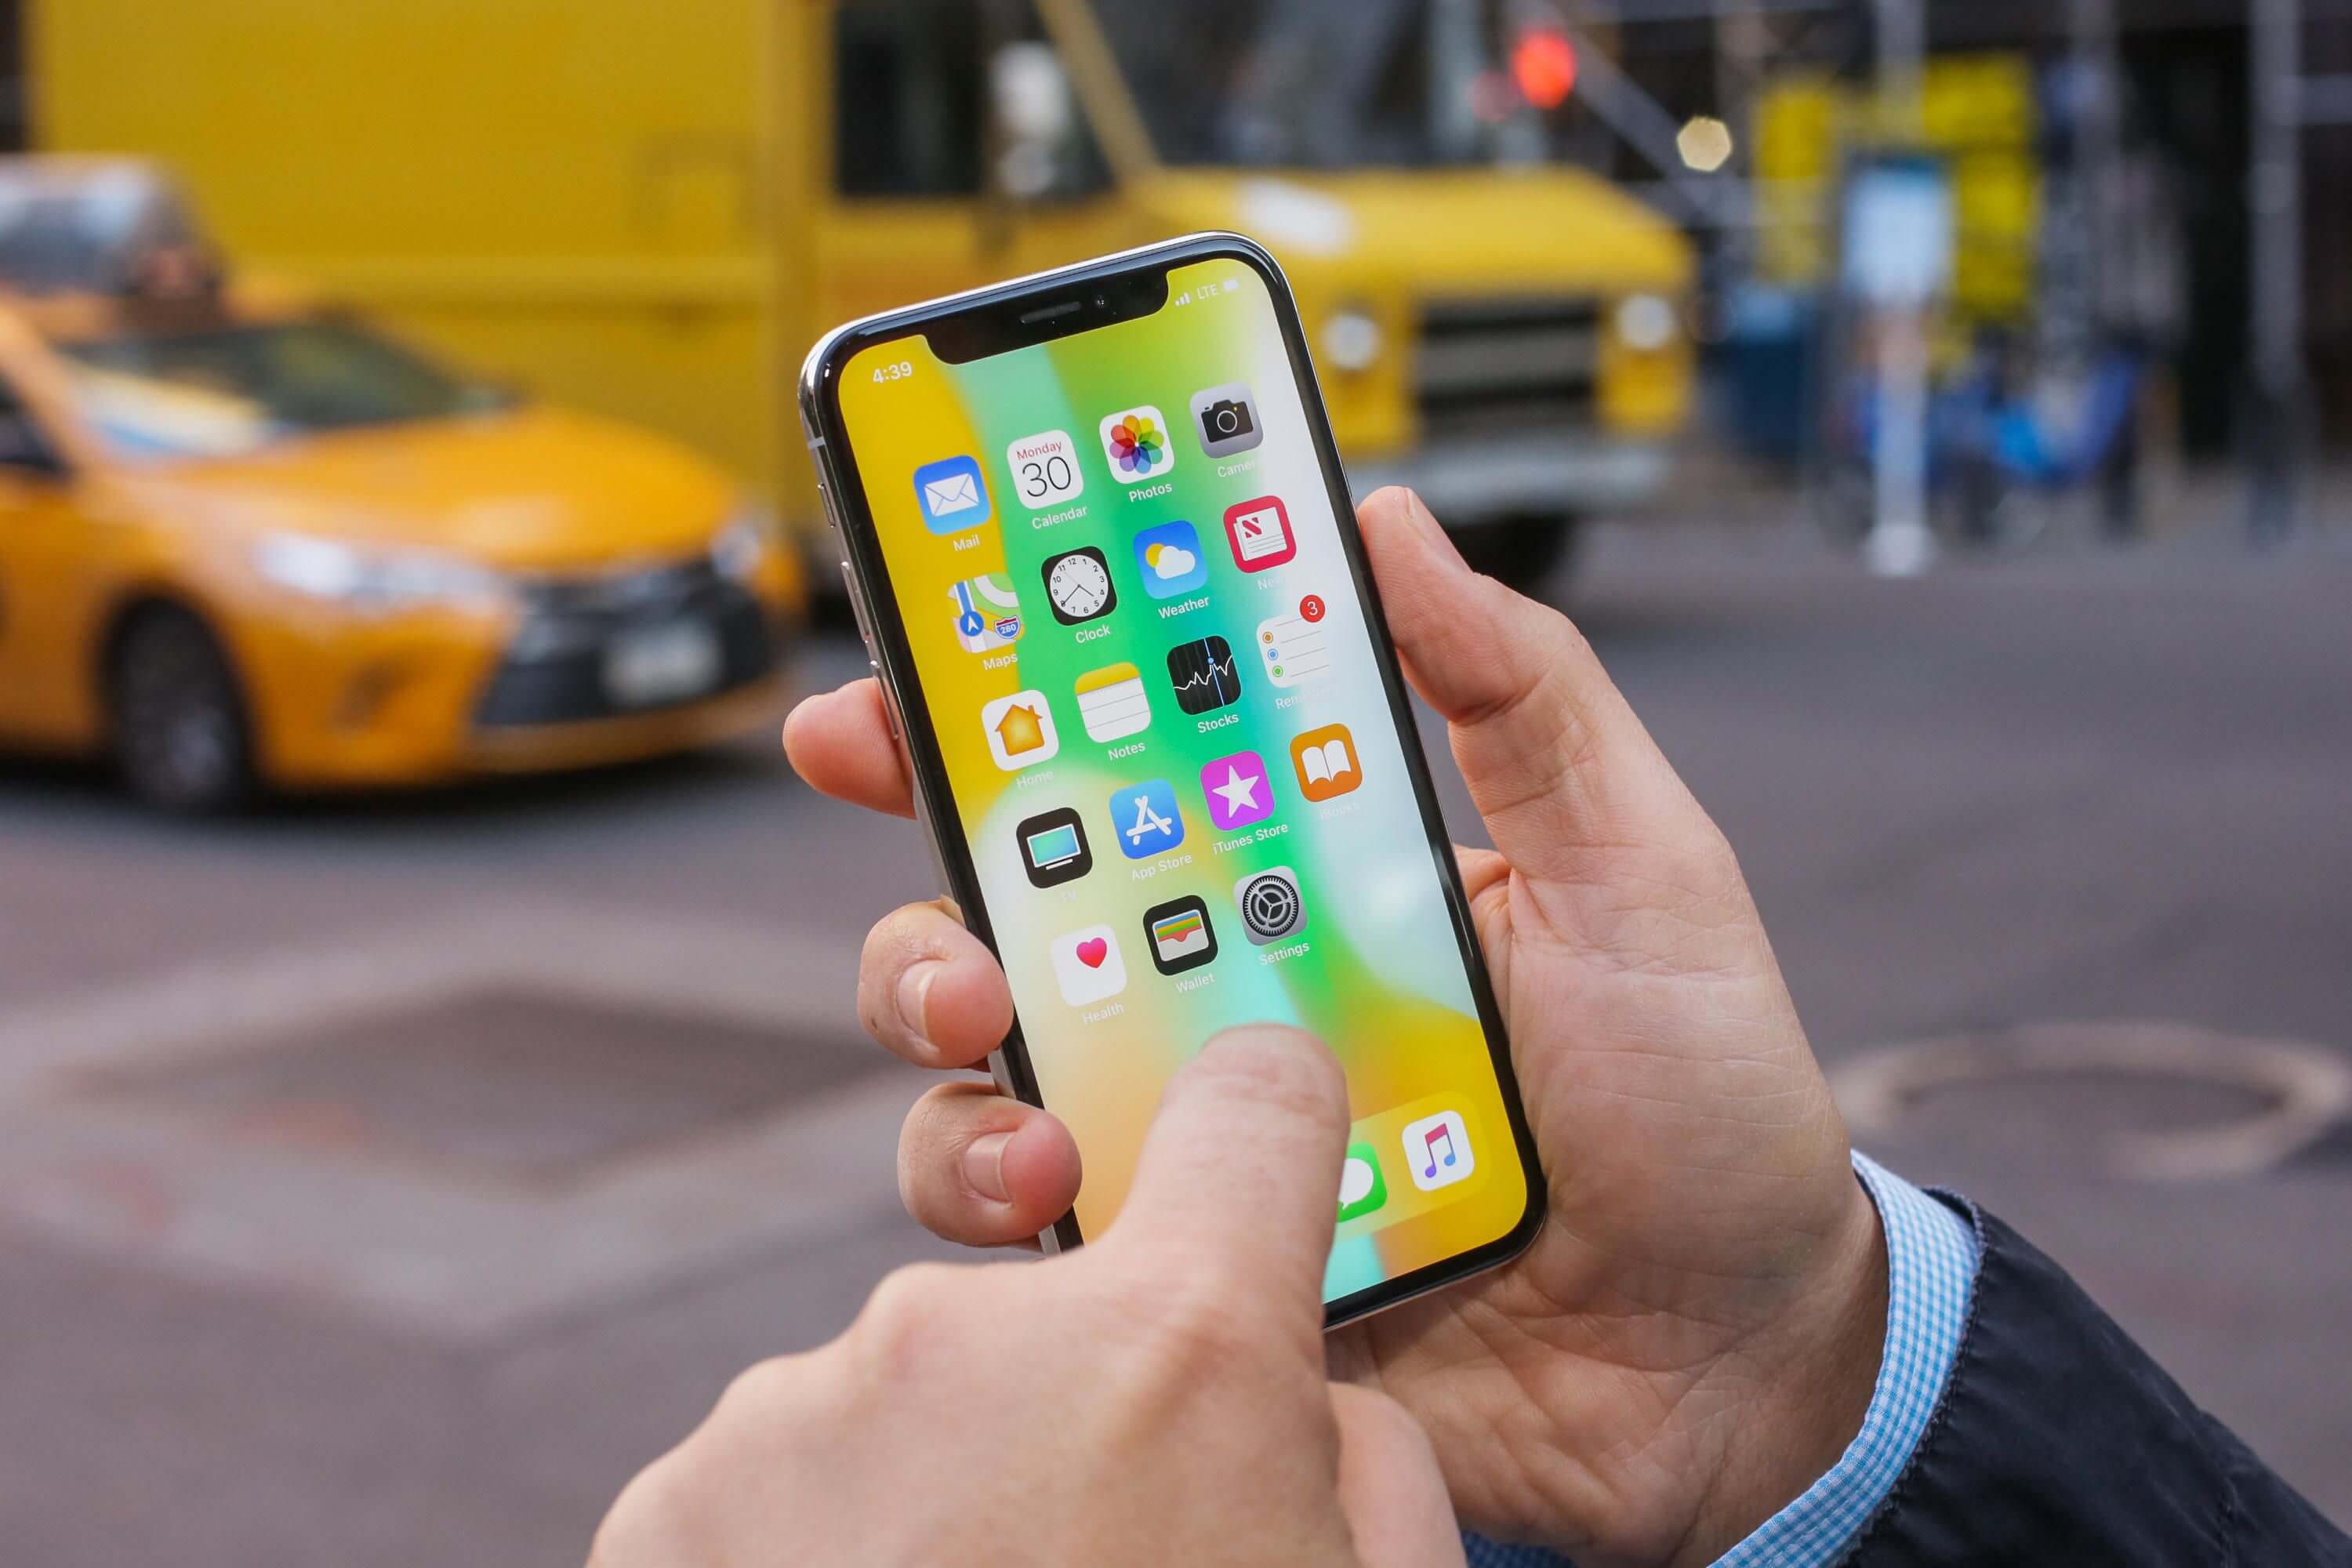 Apple is reportedly slashing iPhone X production in half